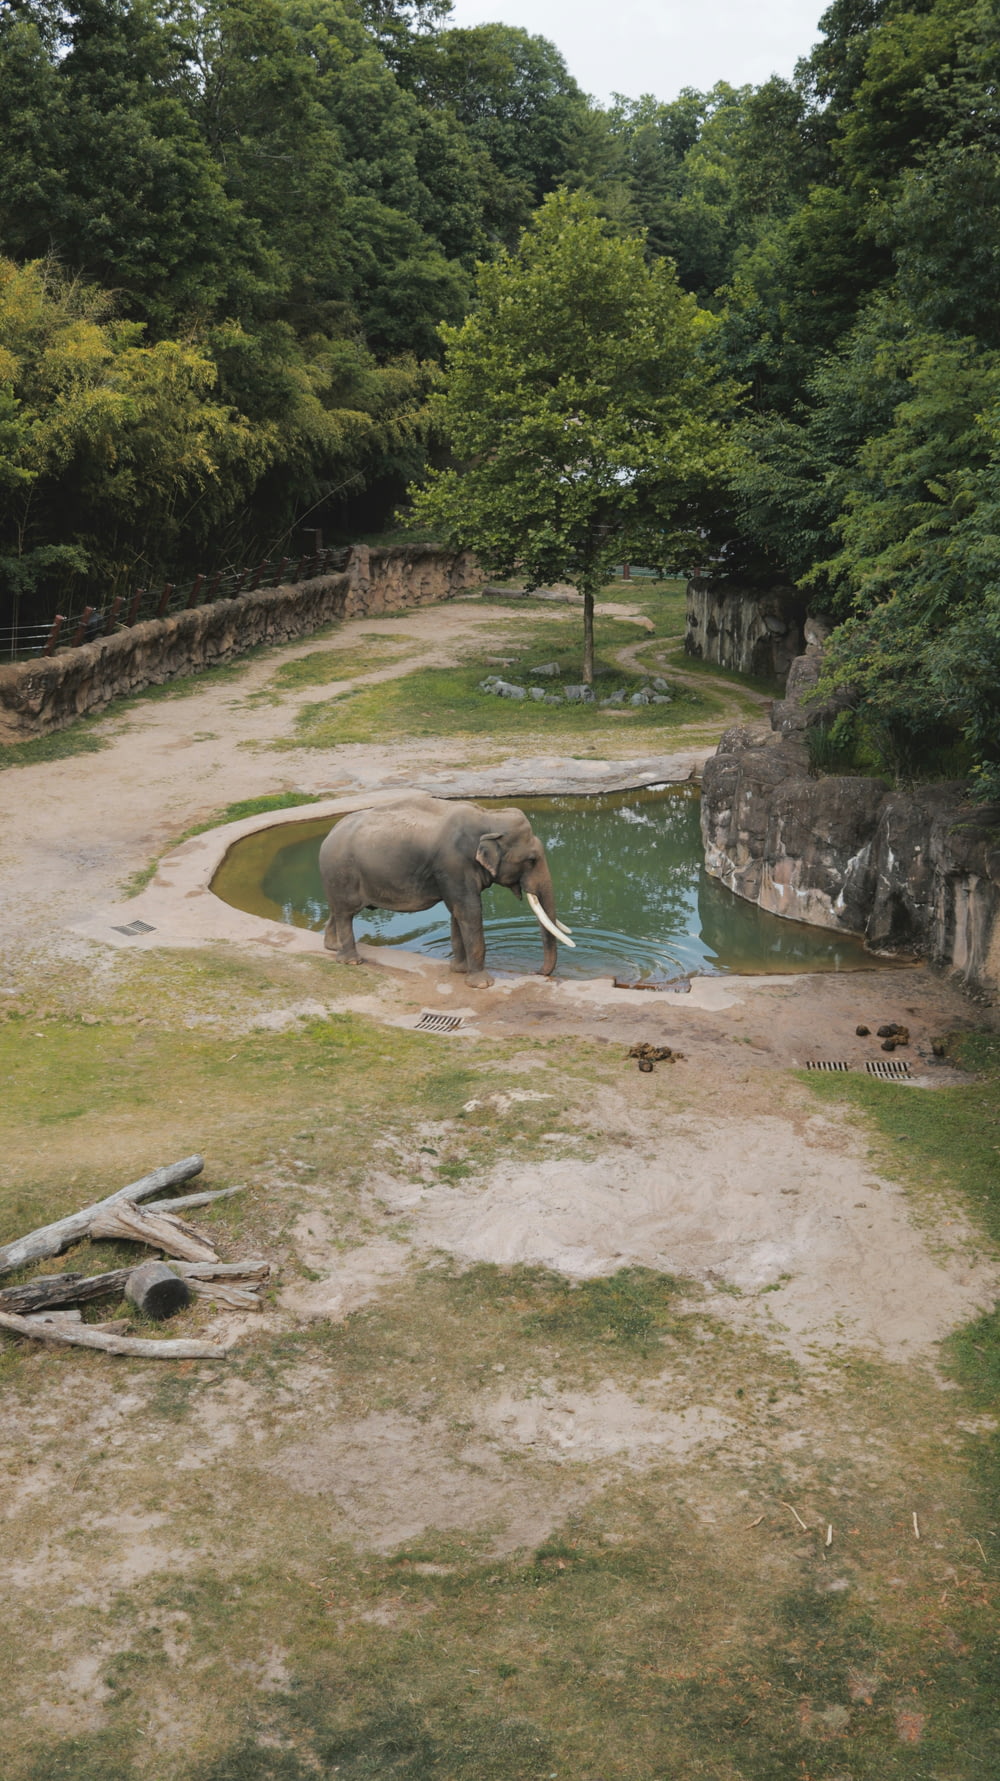 an elephant is standing in the water at the zoo